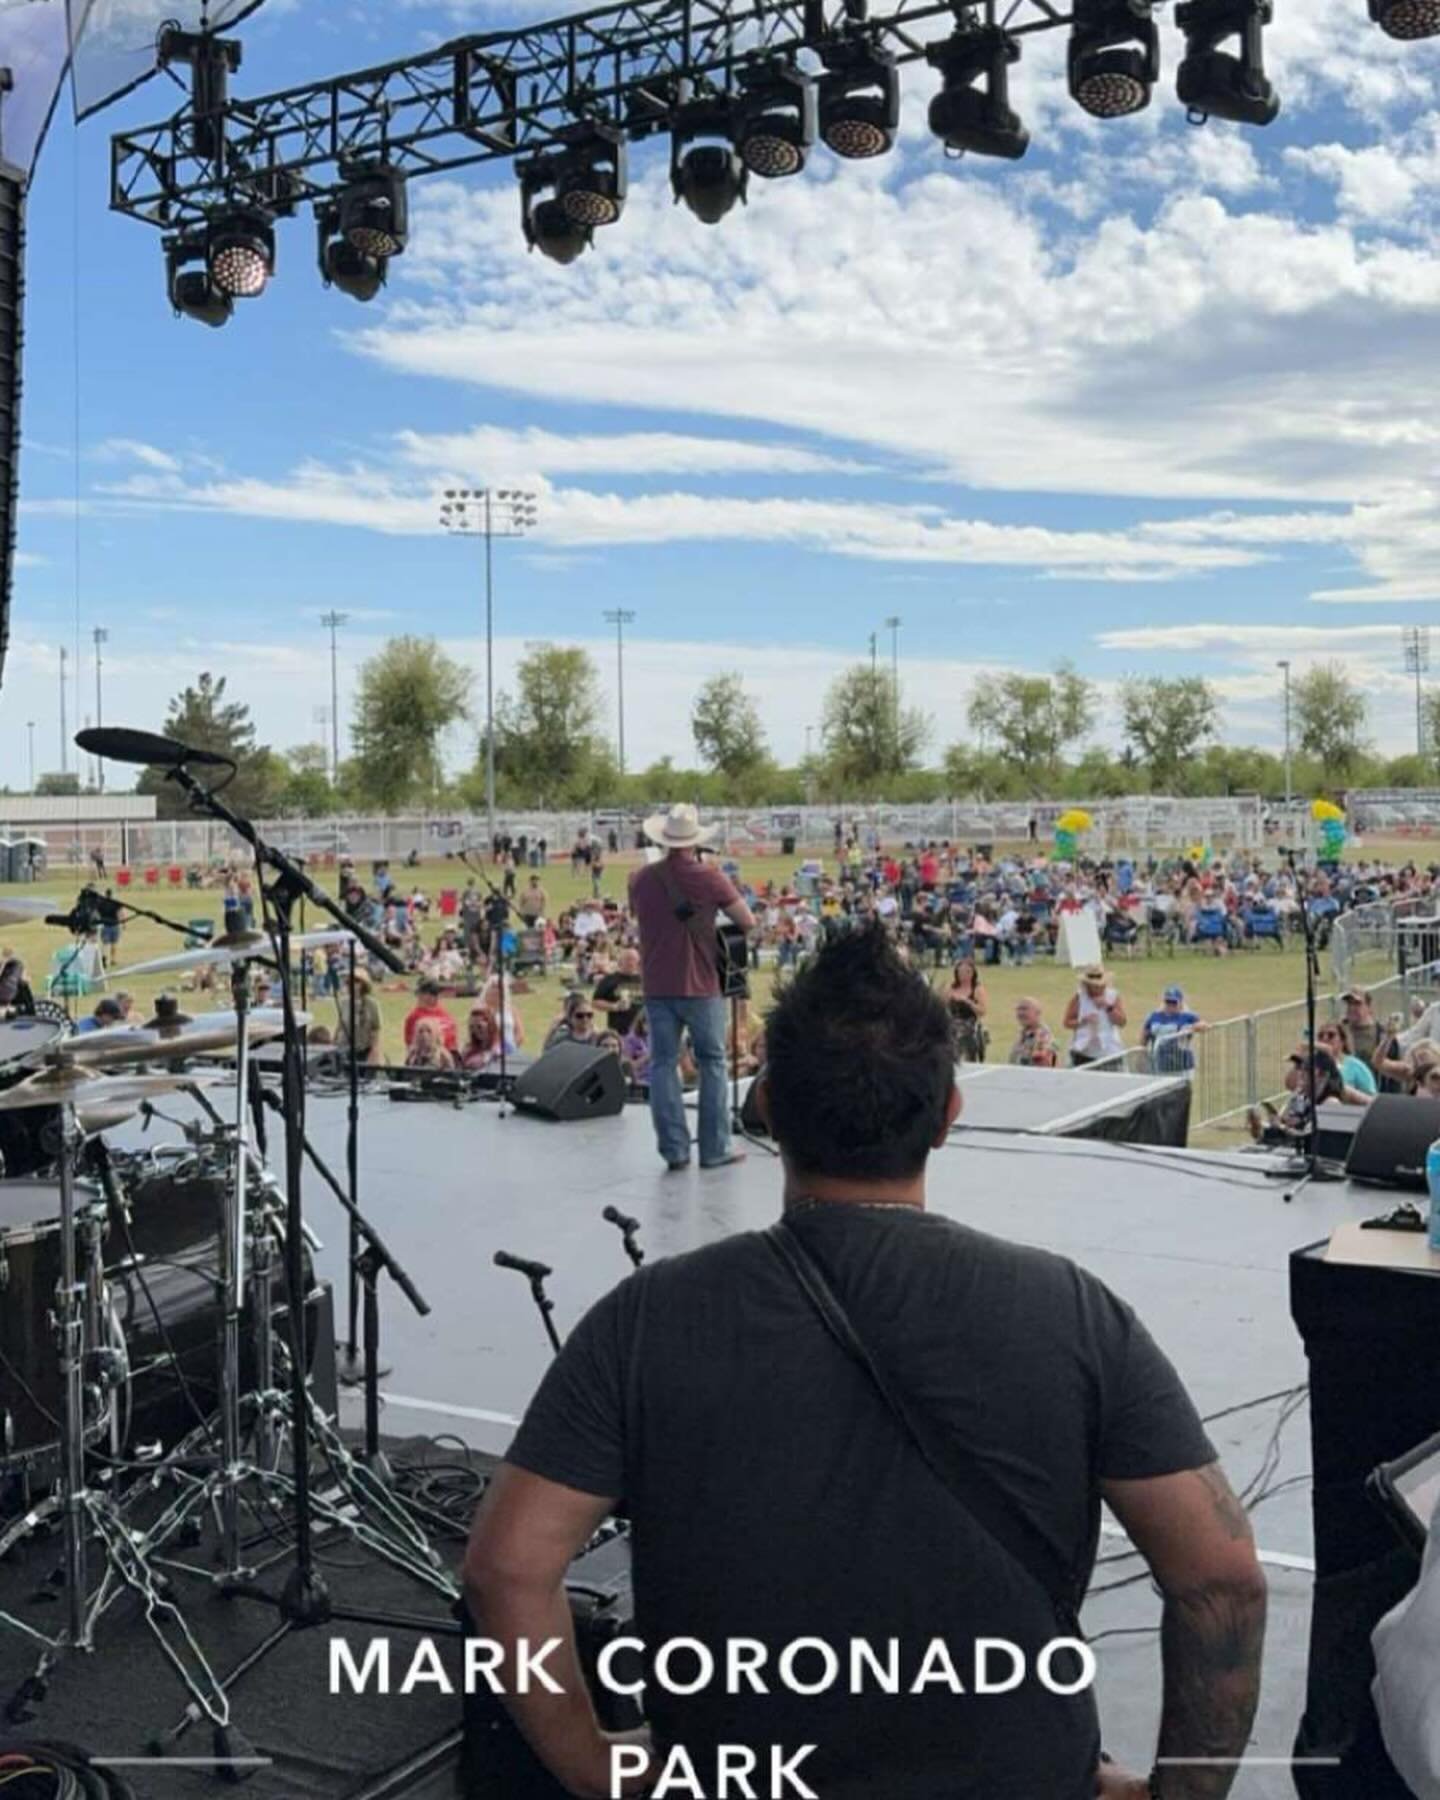 Had a great time jamming in Surprise, Az with @huntleymusic and all the other great musicians and fans at the @outoftheparkmusicfest 🙌🎶 We&rsquo;ll see you next year!!! #musicfestival #livemusic